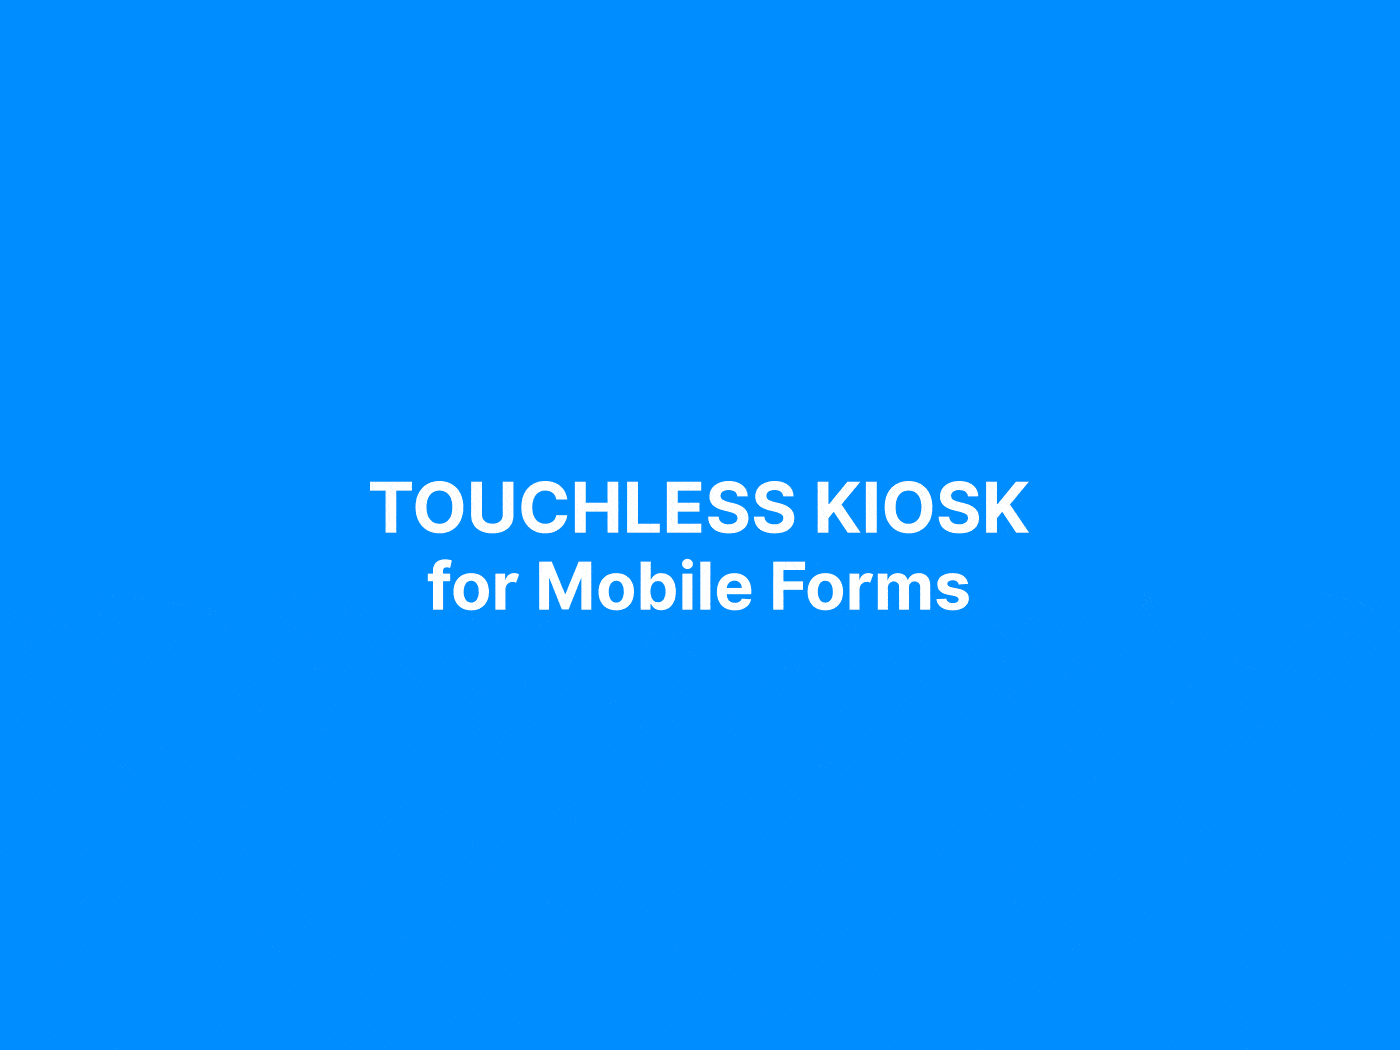 Announcing our new touchless mobile kiosk and Jotform Health app ?